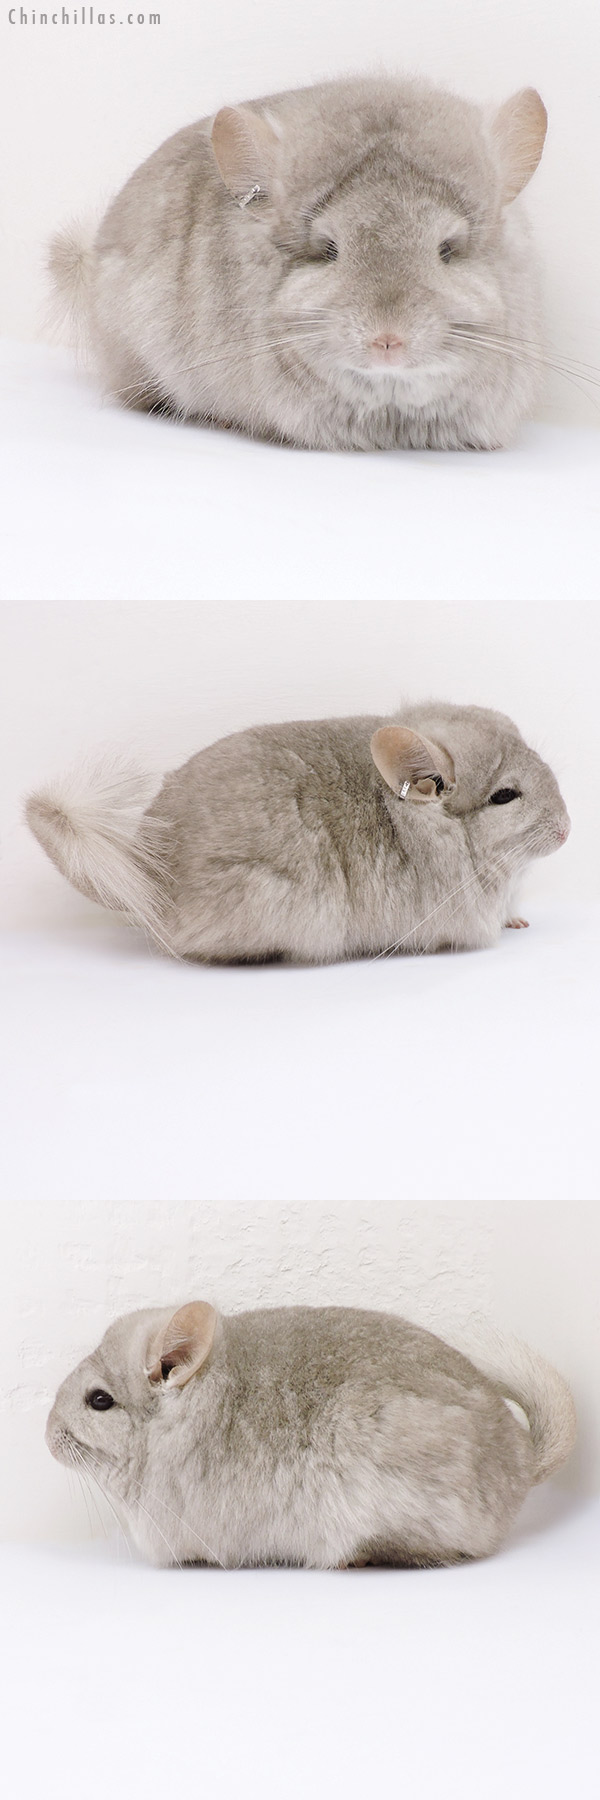 Chinchilla or related item offered for sale or export on Chinchillas.com - 18173 Exceptional Beige  Royal Persian Angora Female Chinchilla